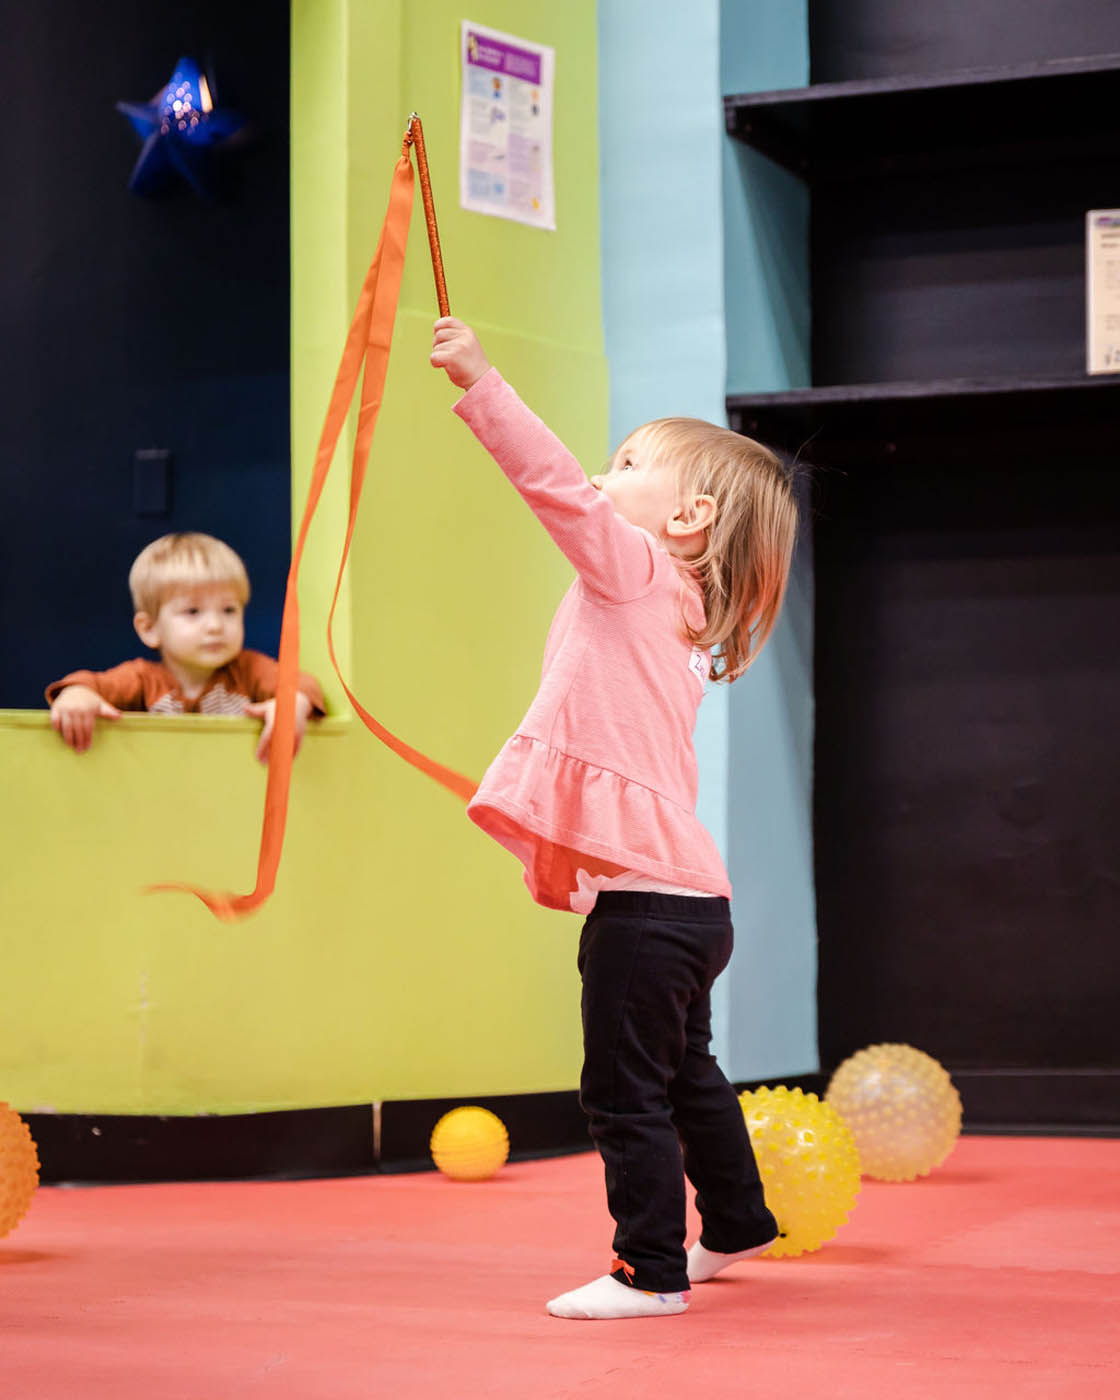 A girl playing with ribbons - experiencing the color and joy of movement at Romp n' Roll.